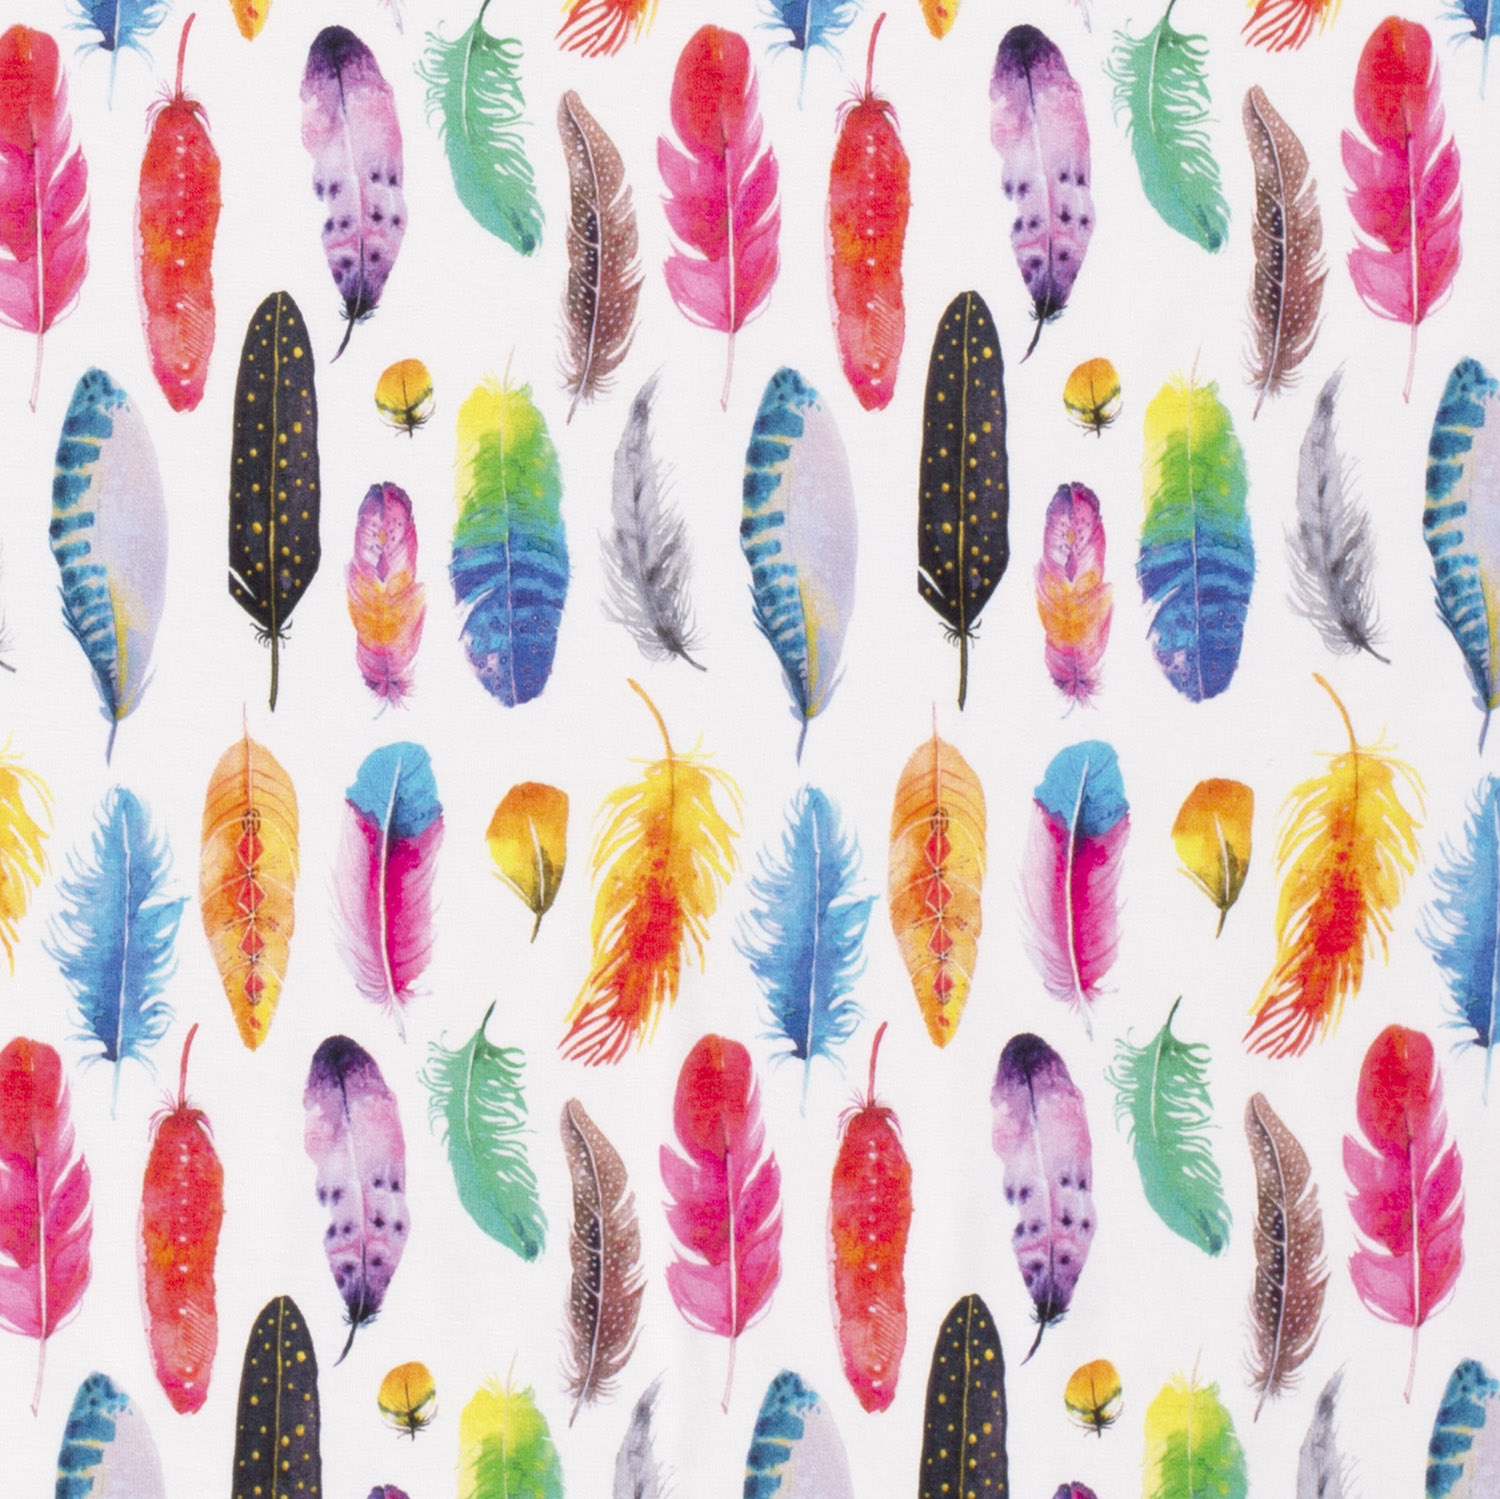 COTTON JERSEY FABRIC DIGITAL PRINTED FEATHERS WHITE